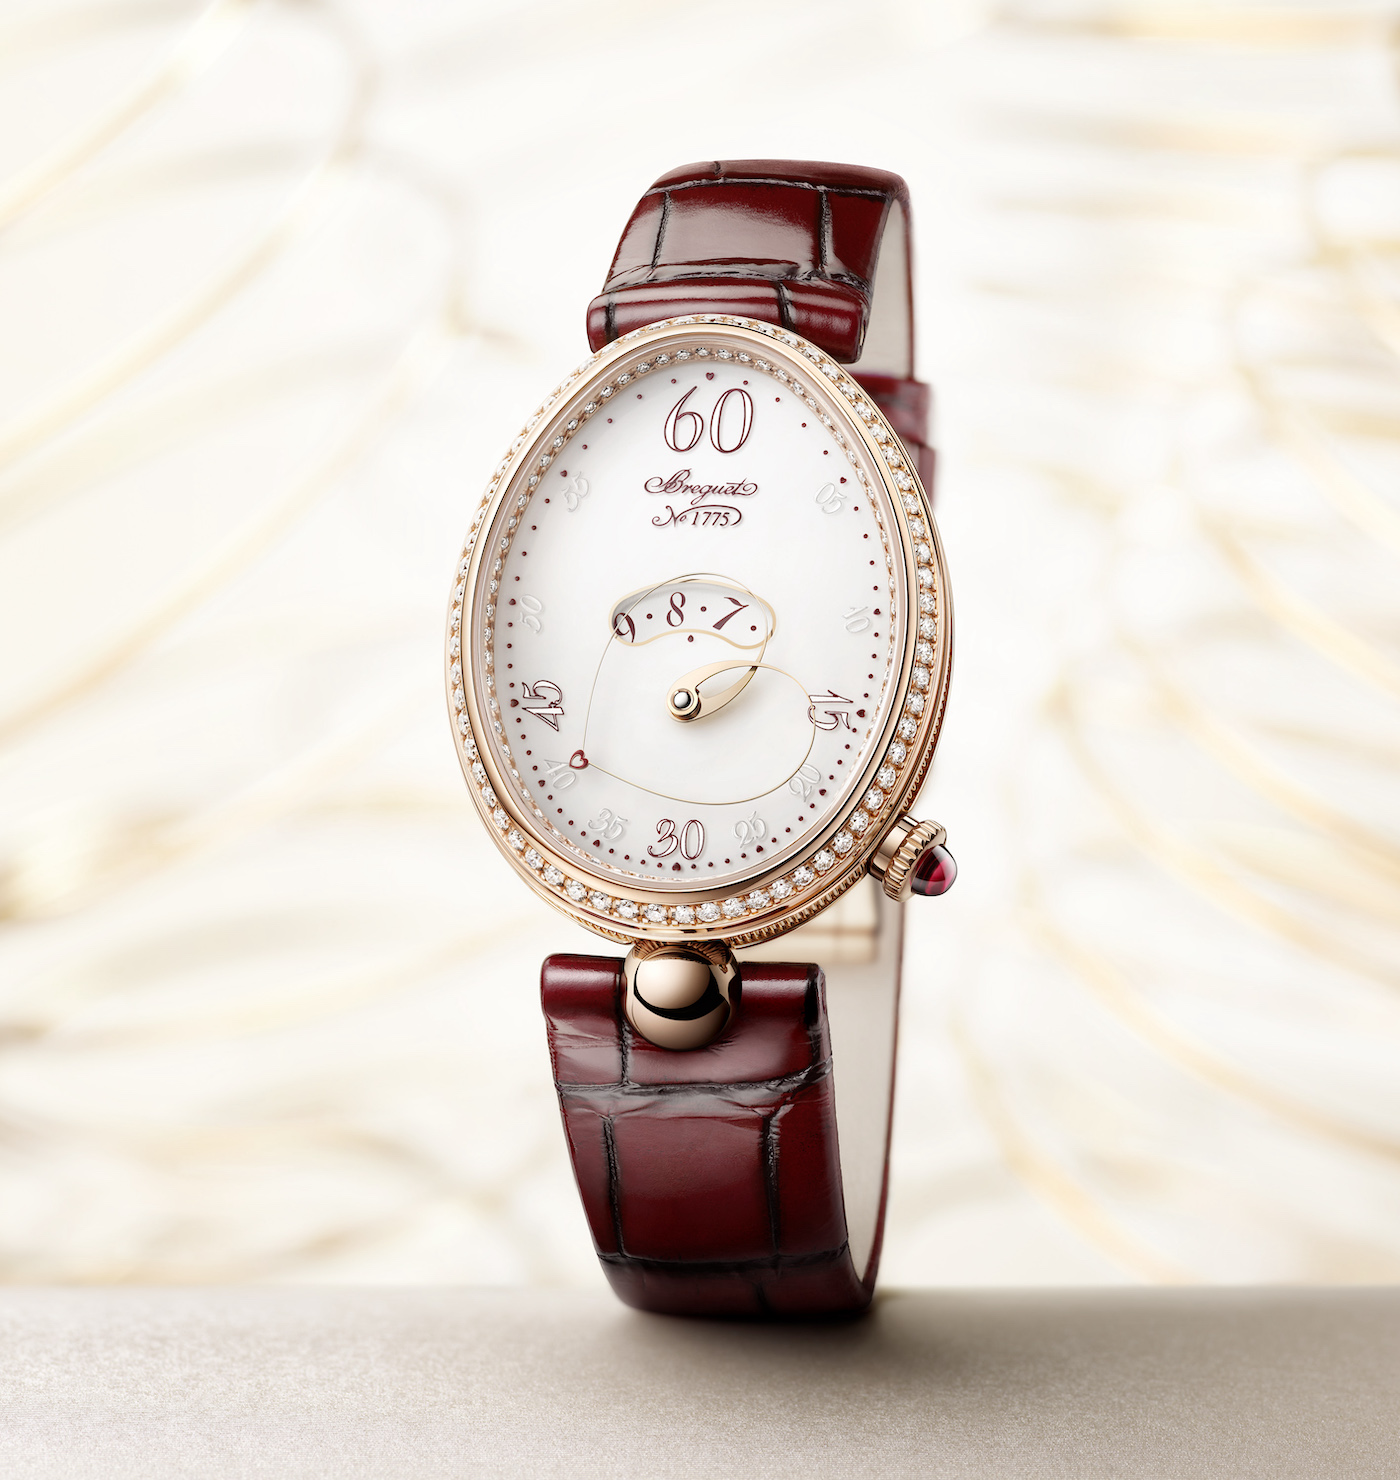 Breguet's flexible hands: when innovation becomes poetry